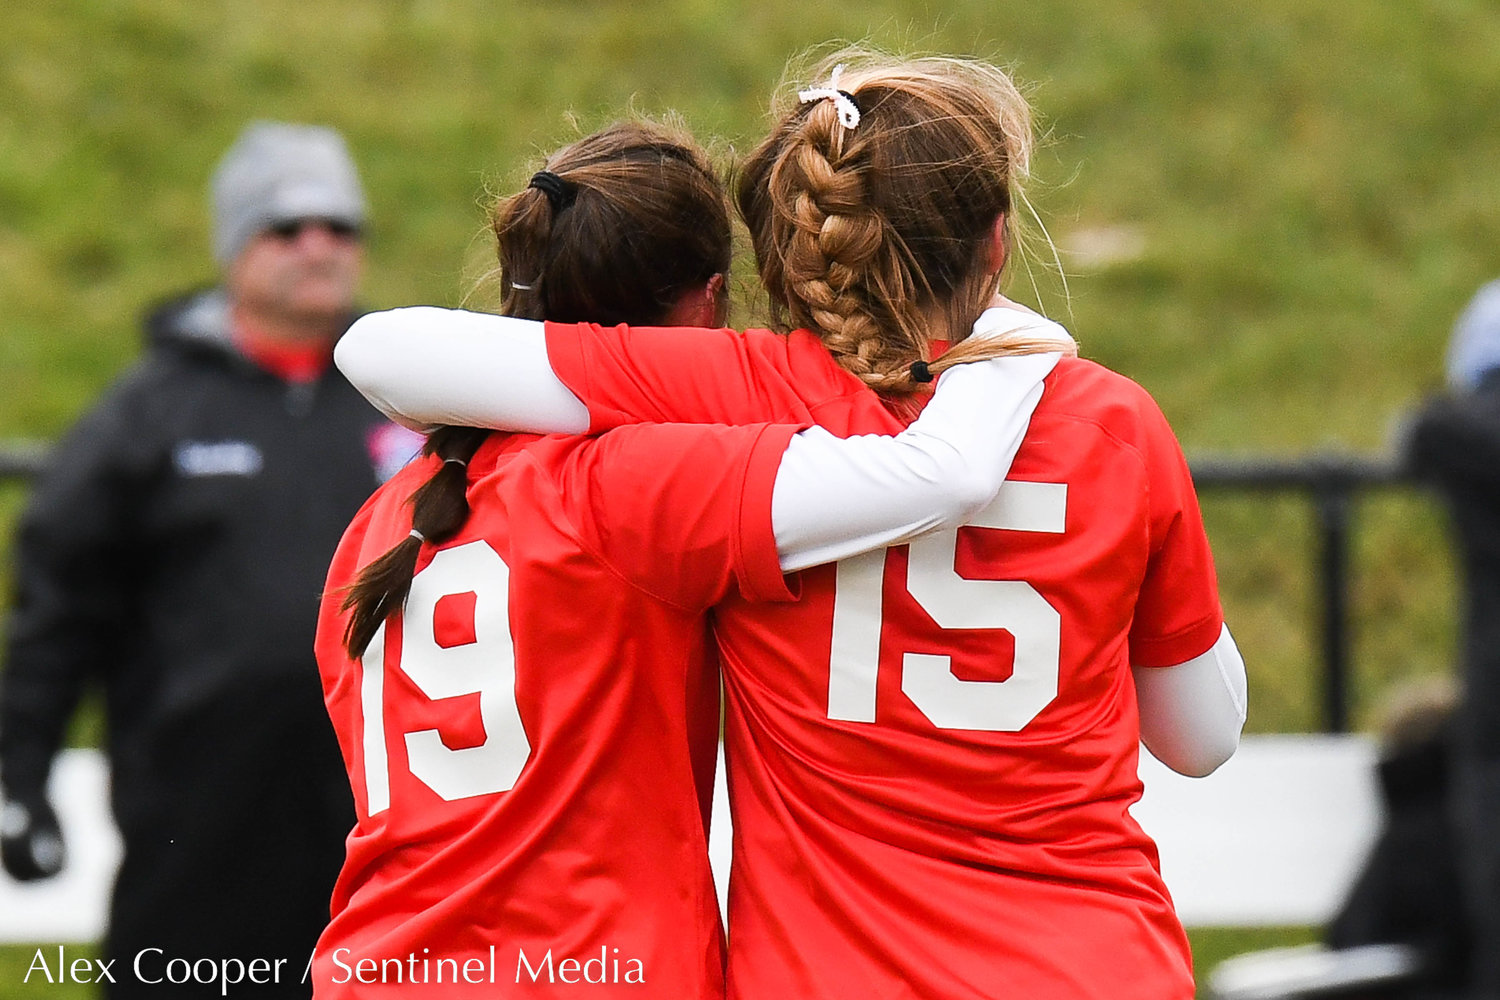 New Hartford players Biddie Clive and Anna Rayhill hug after losing to Albertus Magnus 3-1 in the Class A state final on Sunday at Tompkins-Cortland Community College.